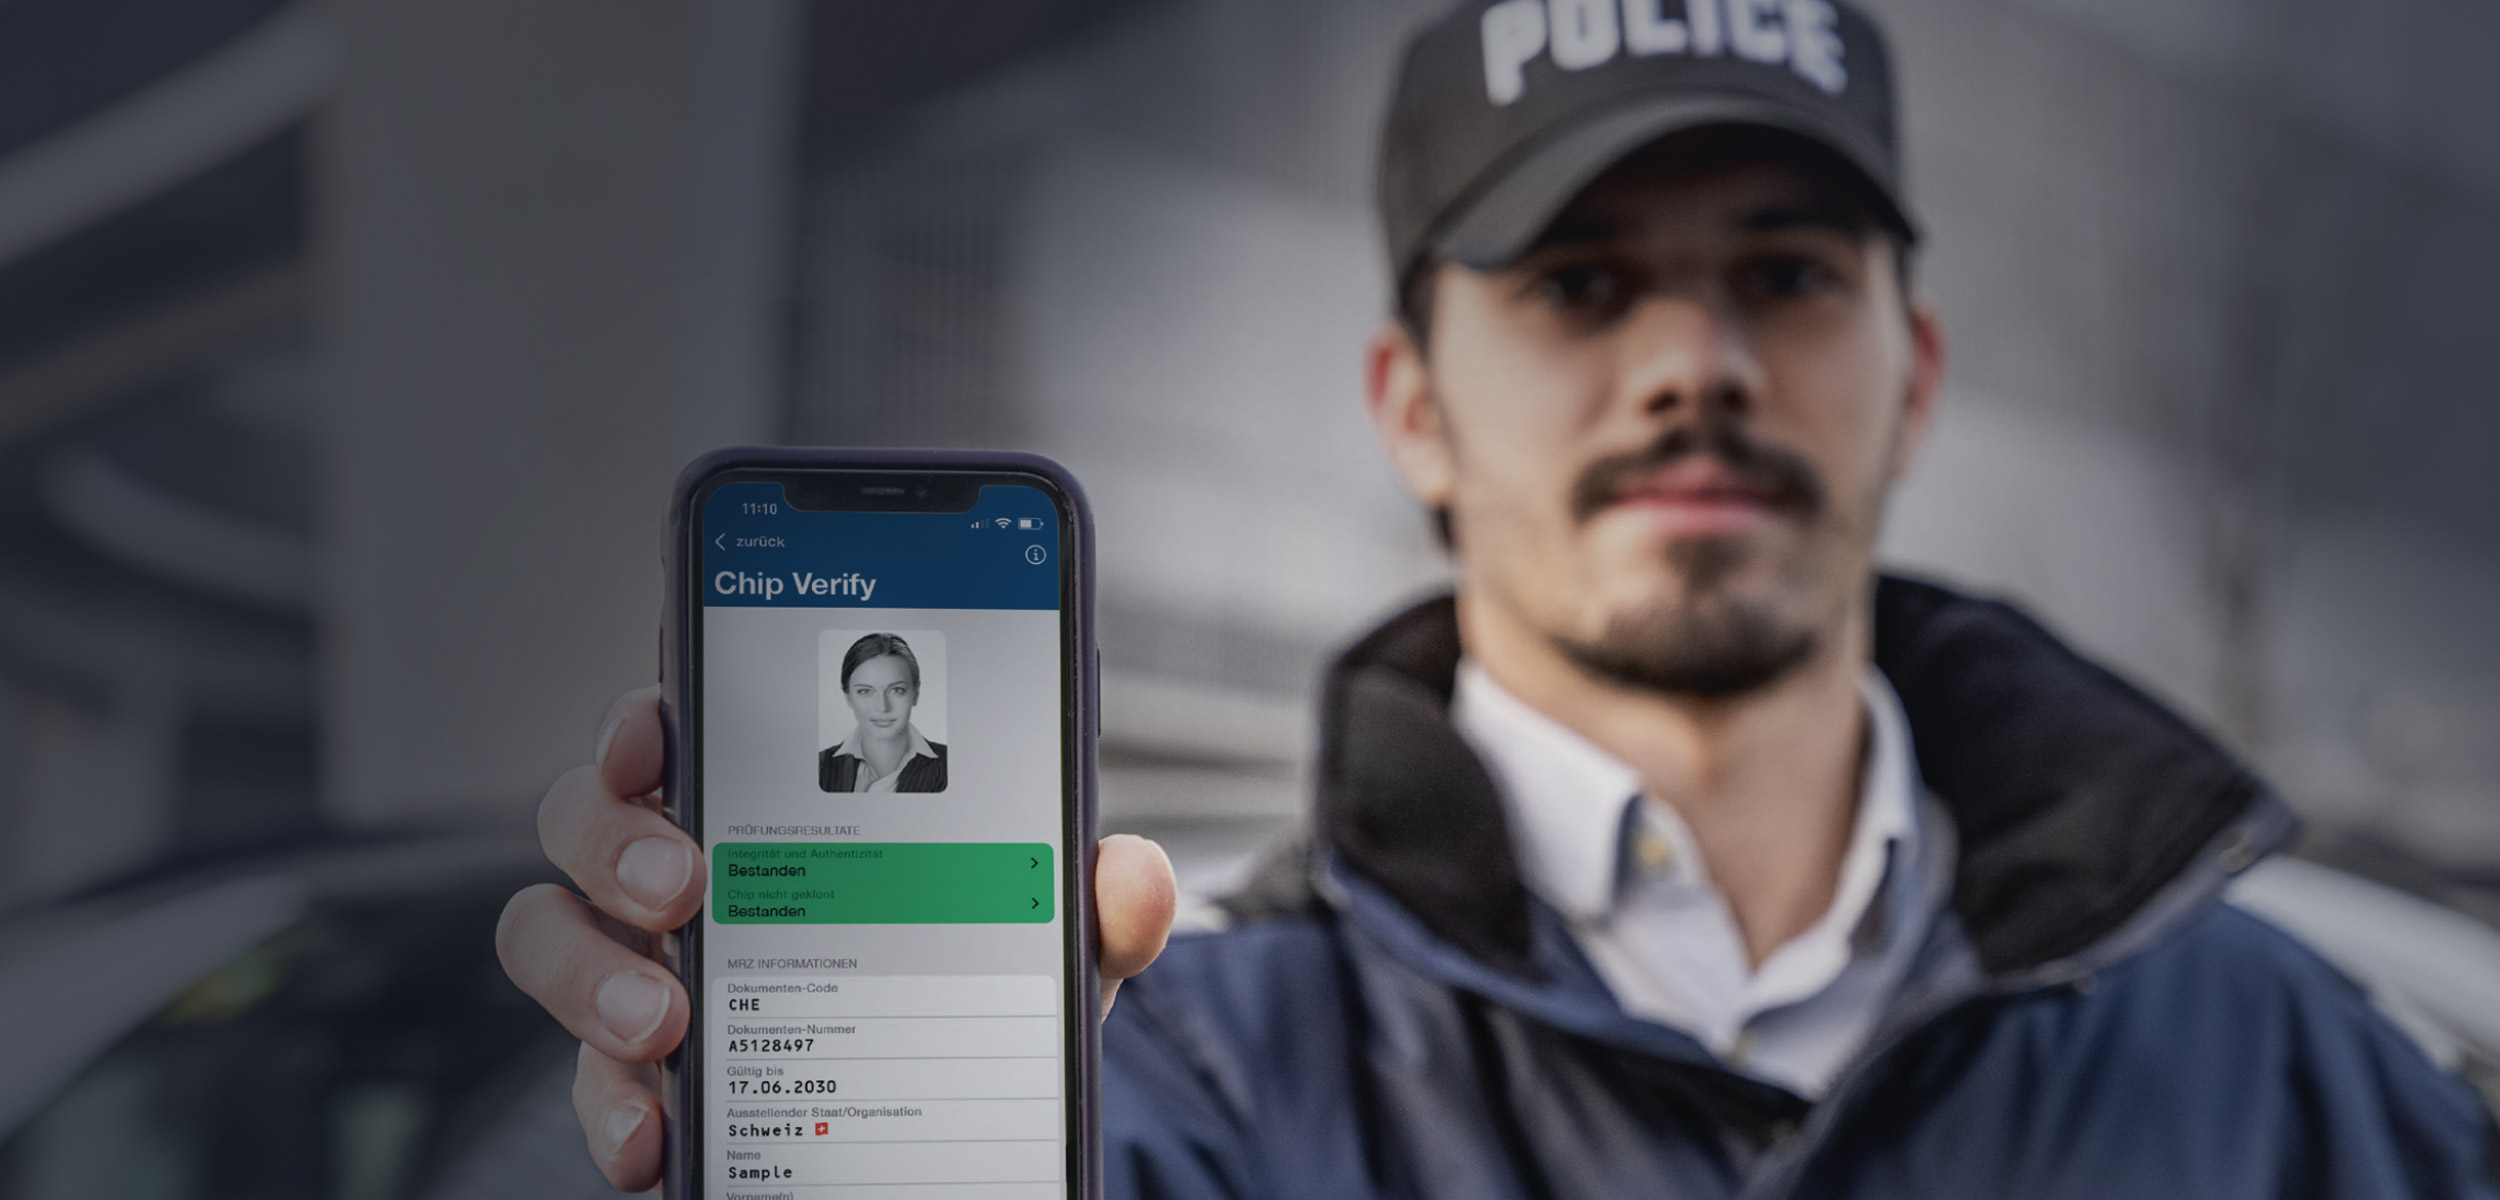 Police Officer uses KINEGRAM DIGITAL POLICING solution on his mobile phone to verify identities